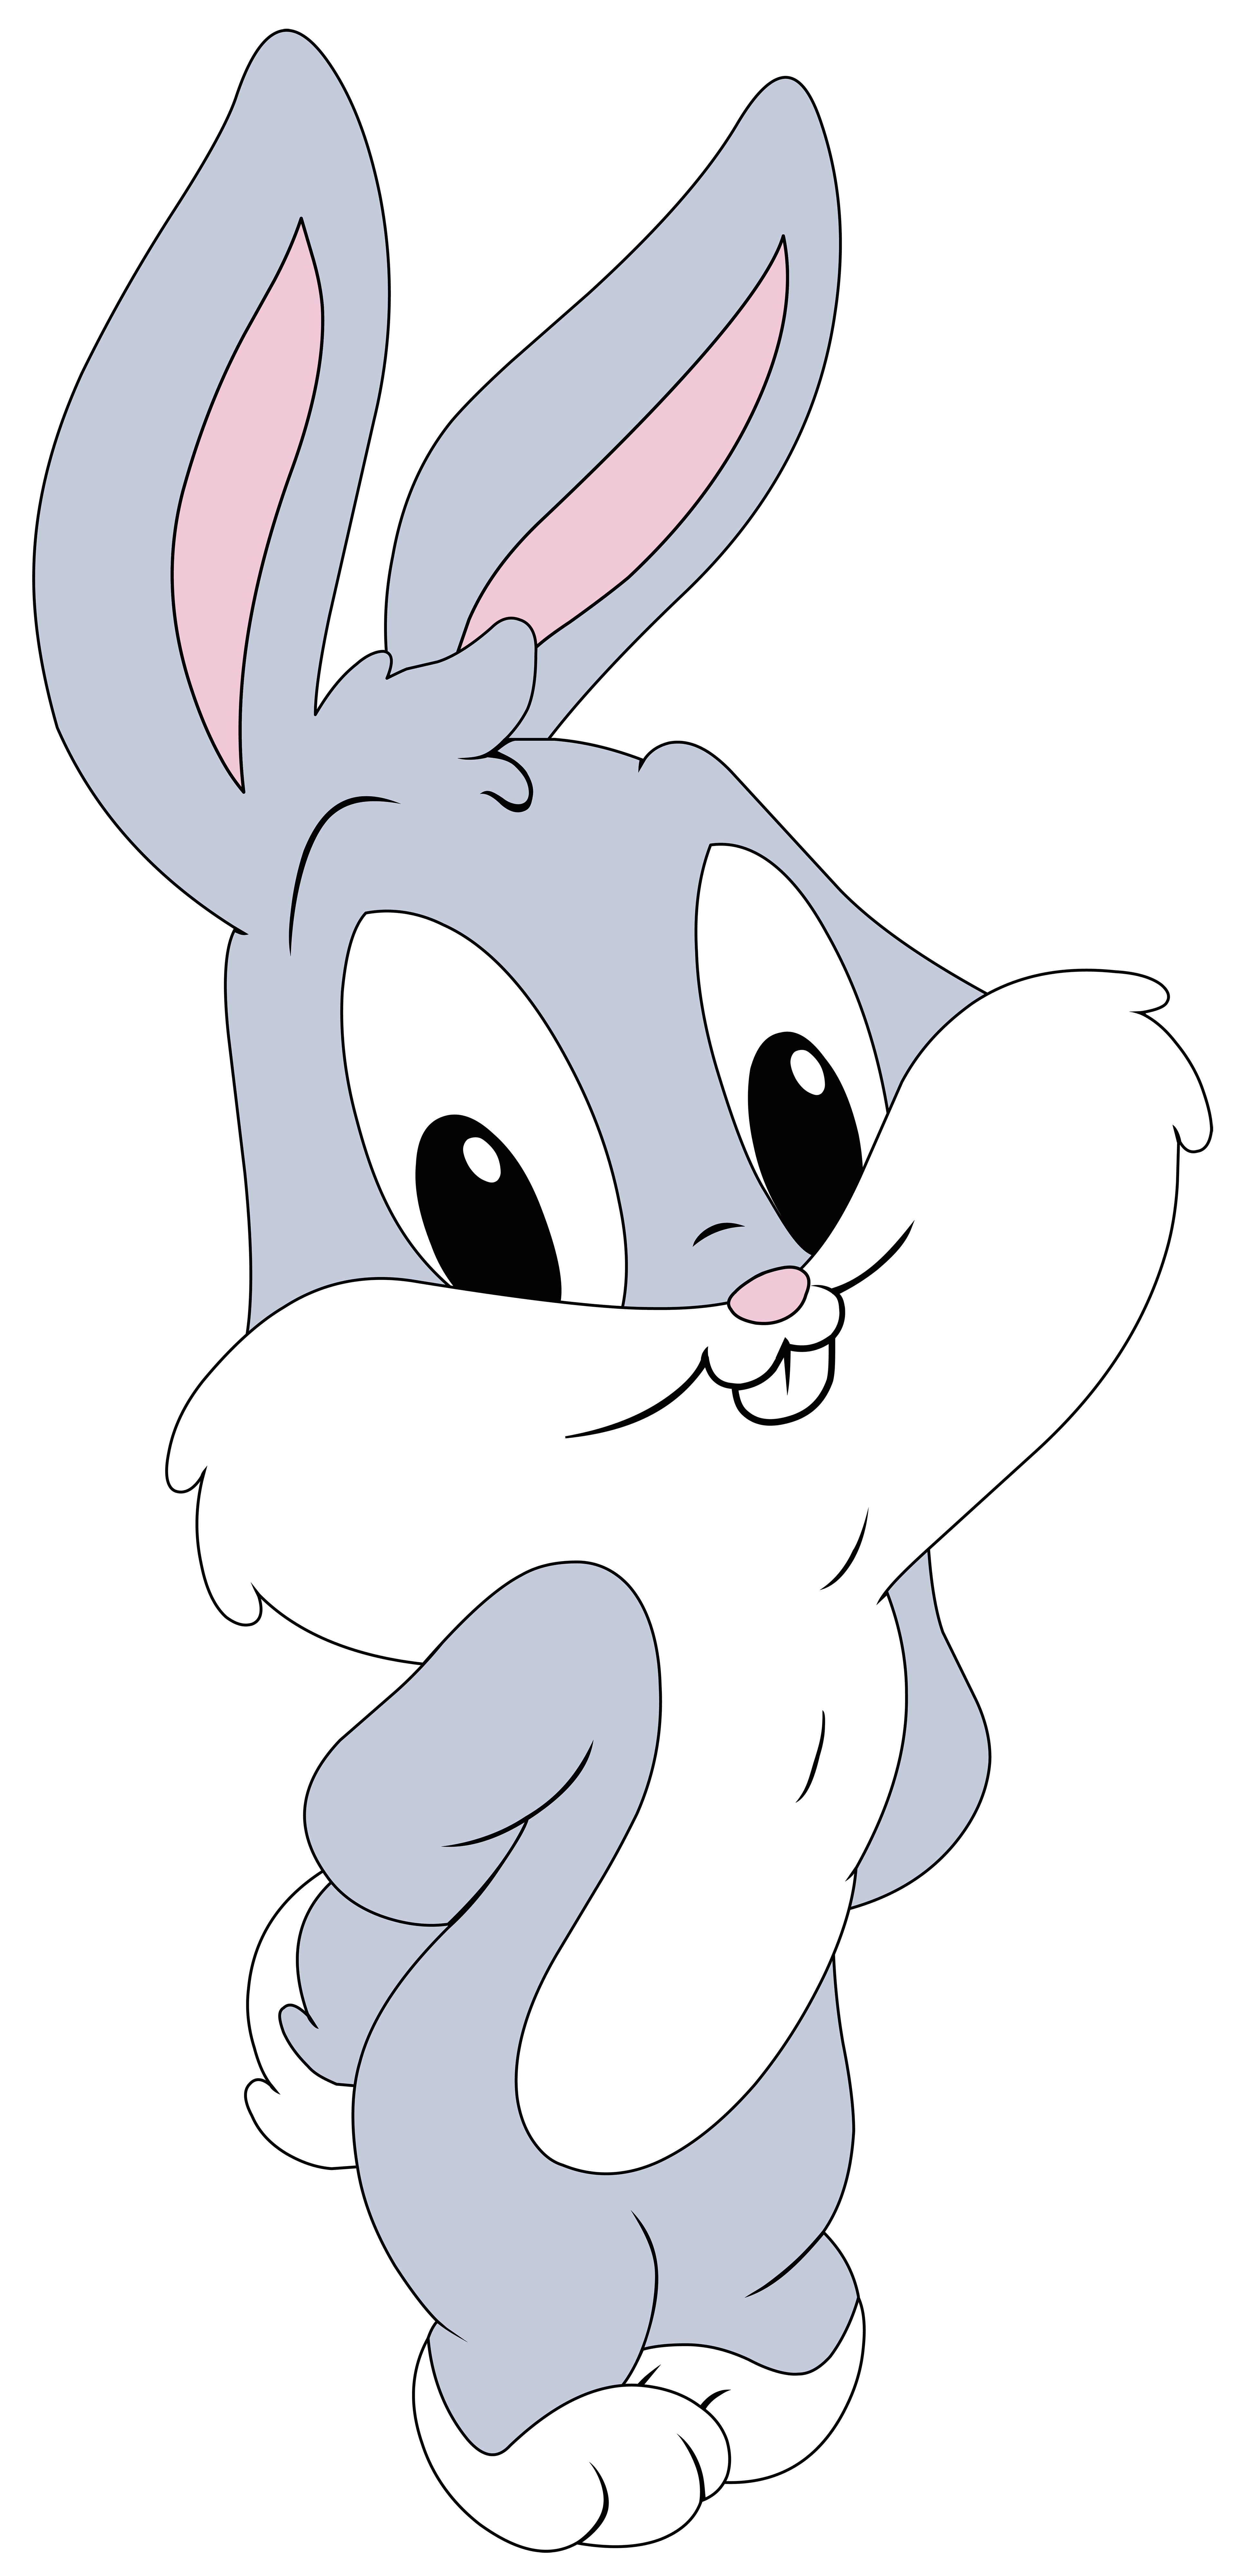 Bugs Bunny Baby Transparent PNG Clip Art Image Quality Image And. Baby Cartoon Drawing, Baby Cartoon Characters, Baby Looney Tunes